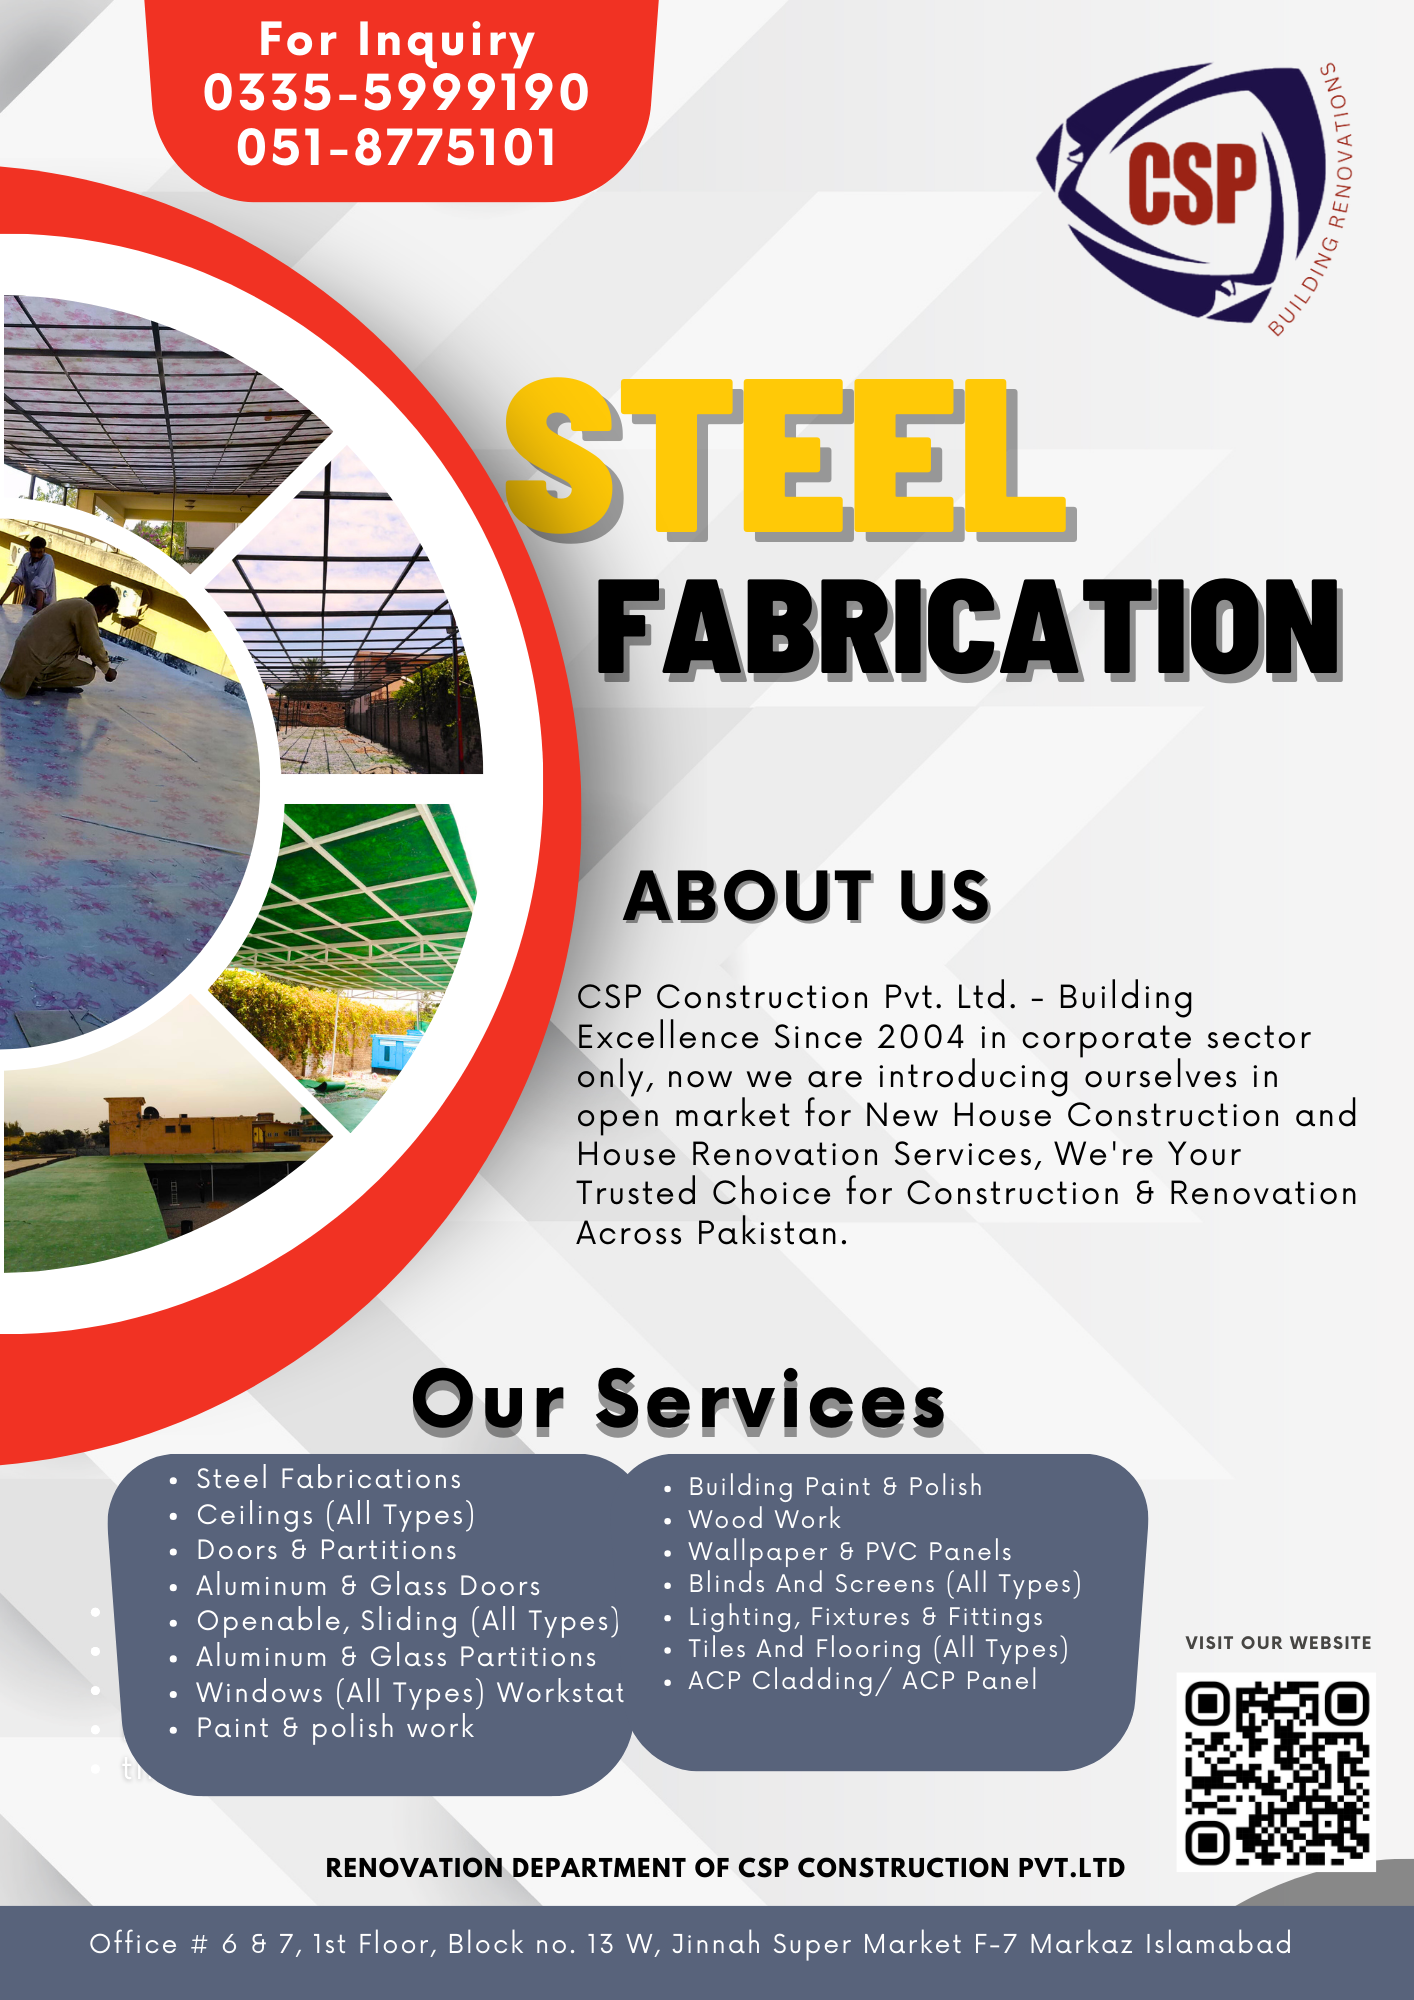 images/services/Steelfabrication.png